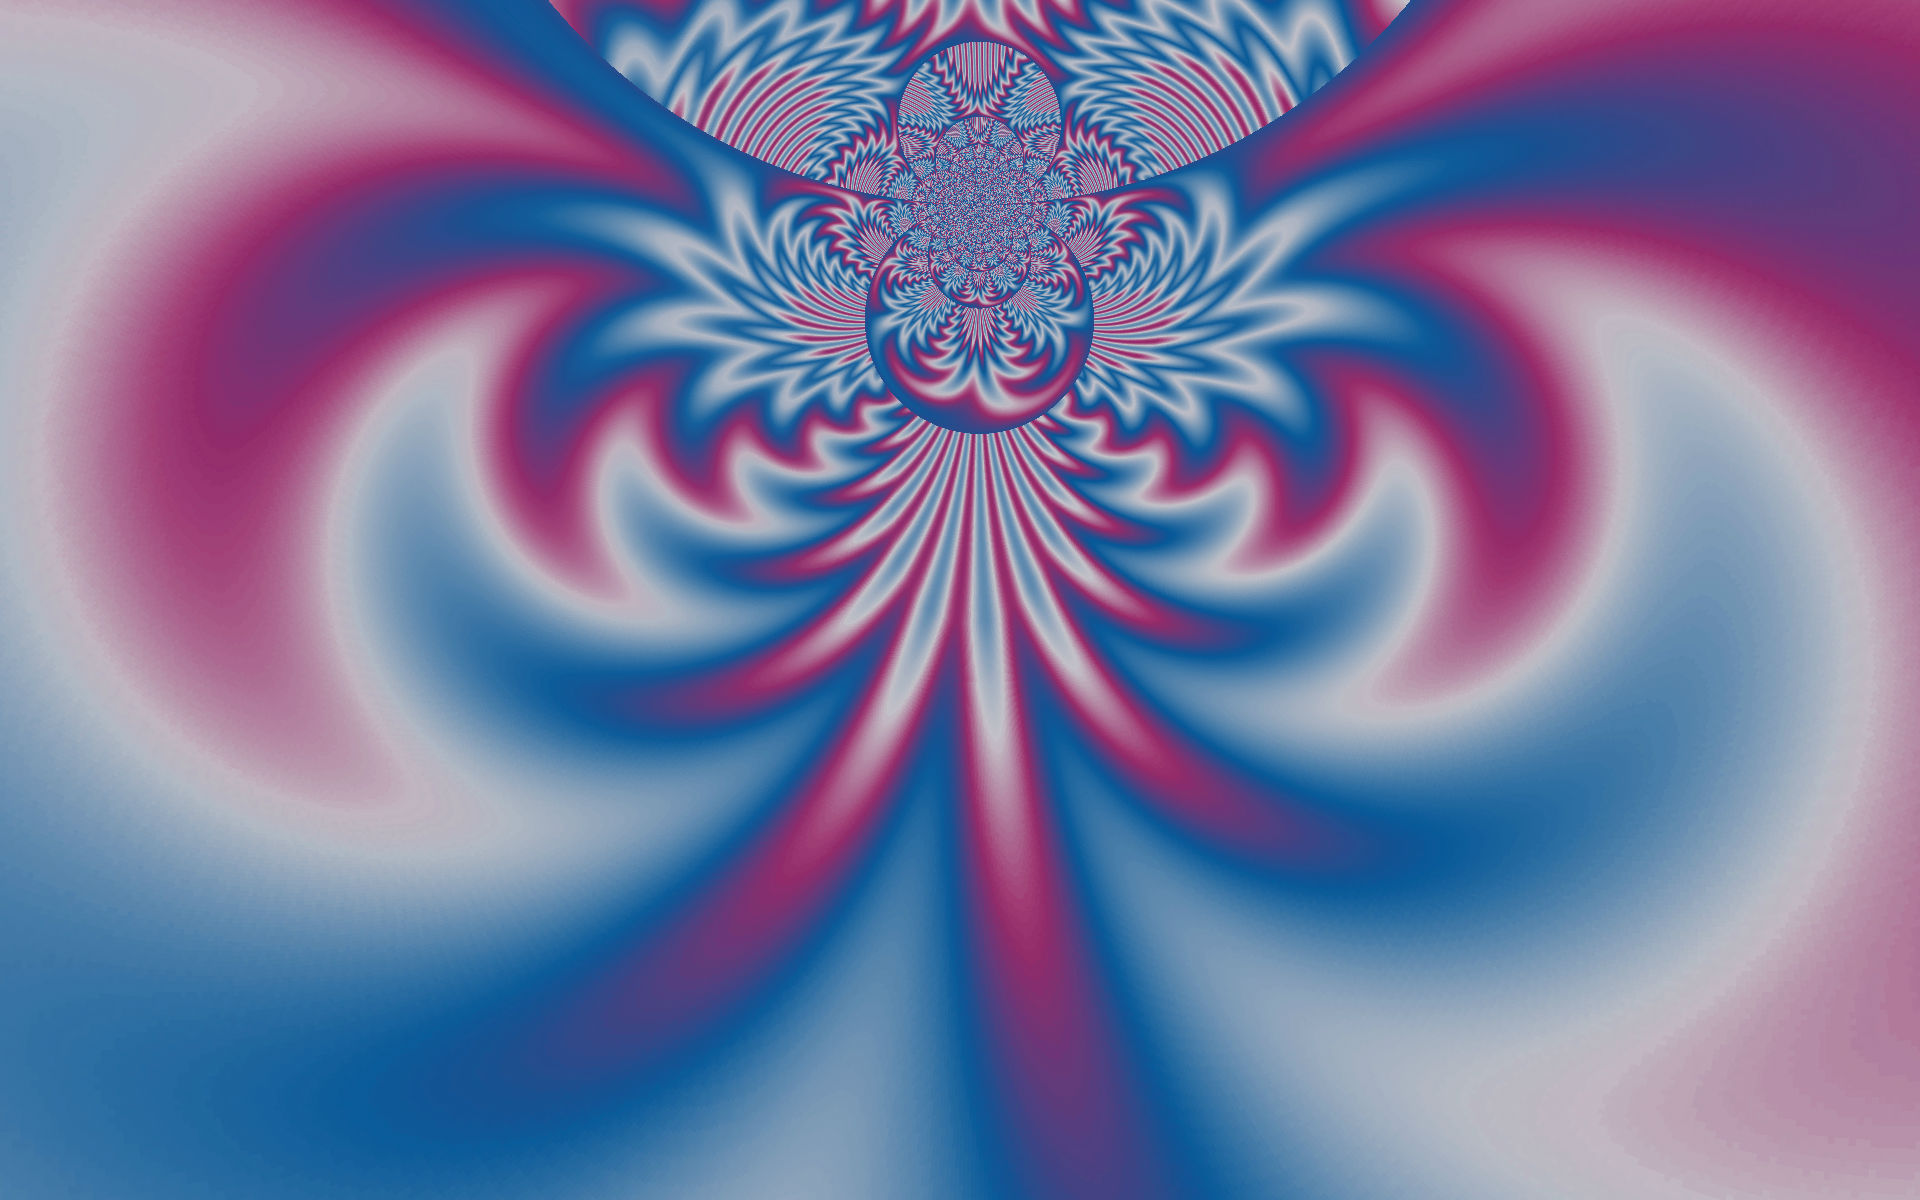 Free HD abstract, digital art, blue, colors, kaleidoscope, red